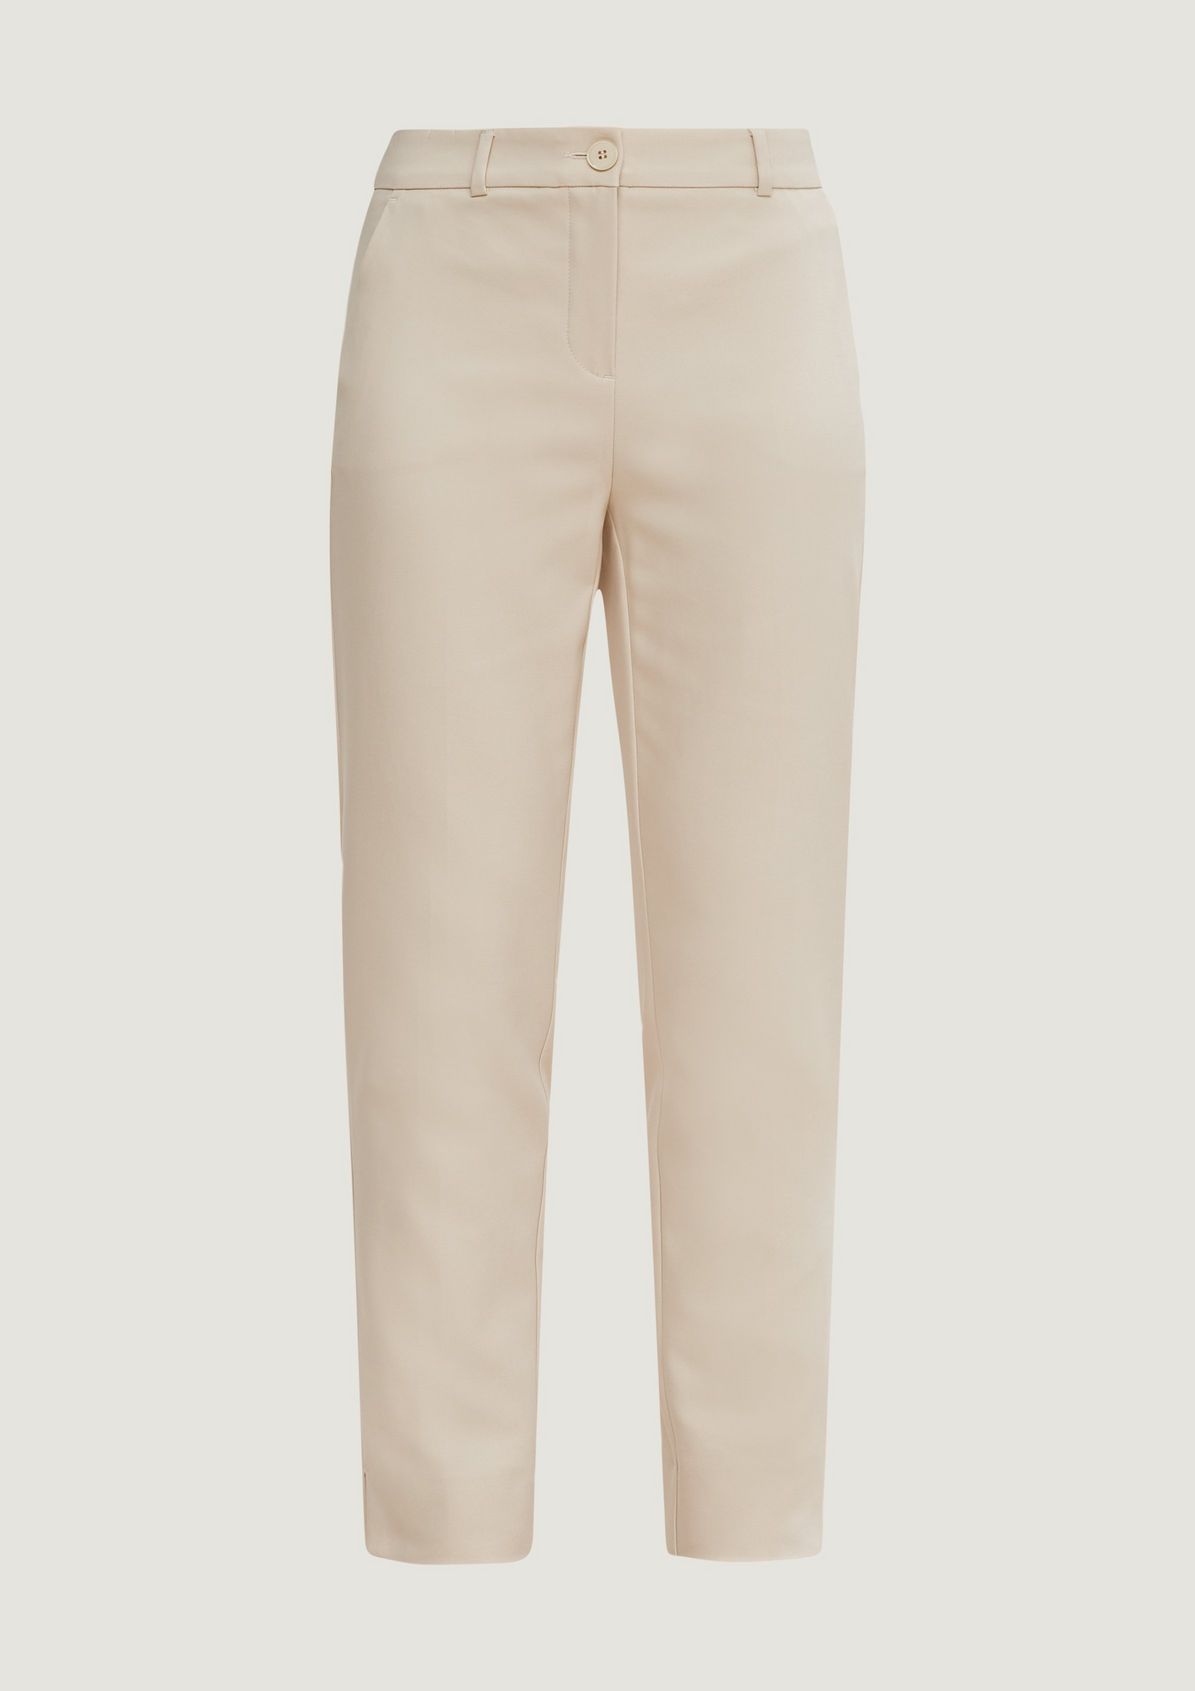 Womens Clothing Trousers Rebecca Taylor Cotton Pants in White Slacks and Chinos Straight-leg trousers 